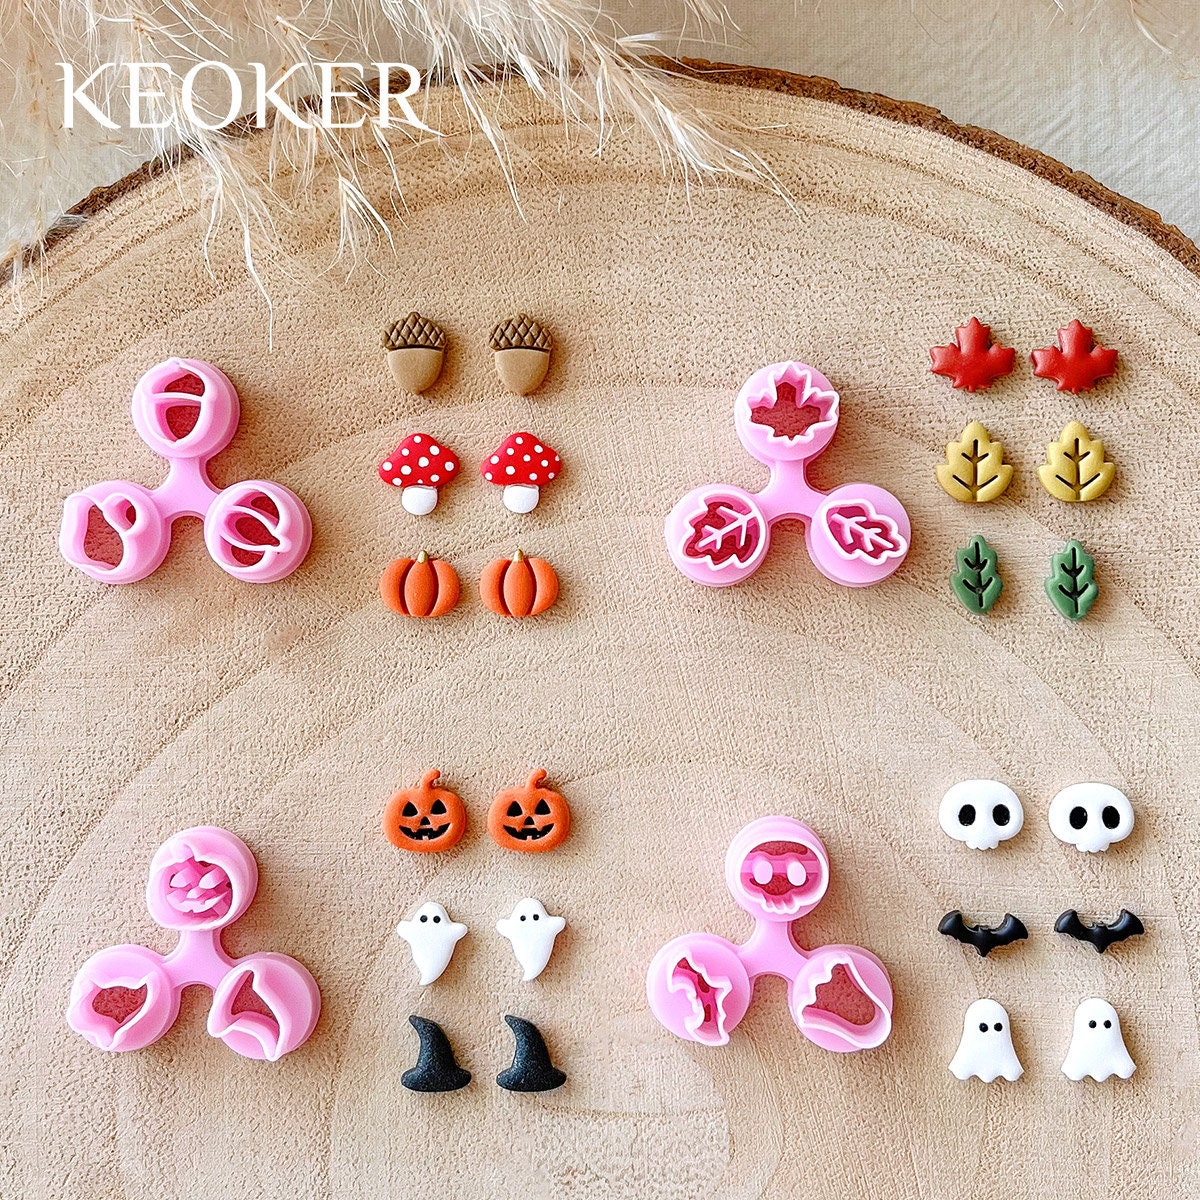 Keoker 24 Mini Clay Cutters with Screw Handle, Polymer for Earrings, Small  Tools for Clay Jewelry for Halloween Christmas Design - Yahoo Shopping